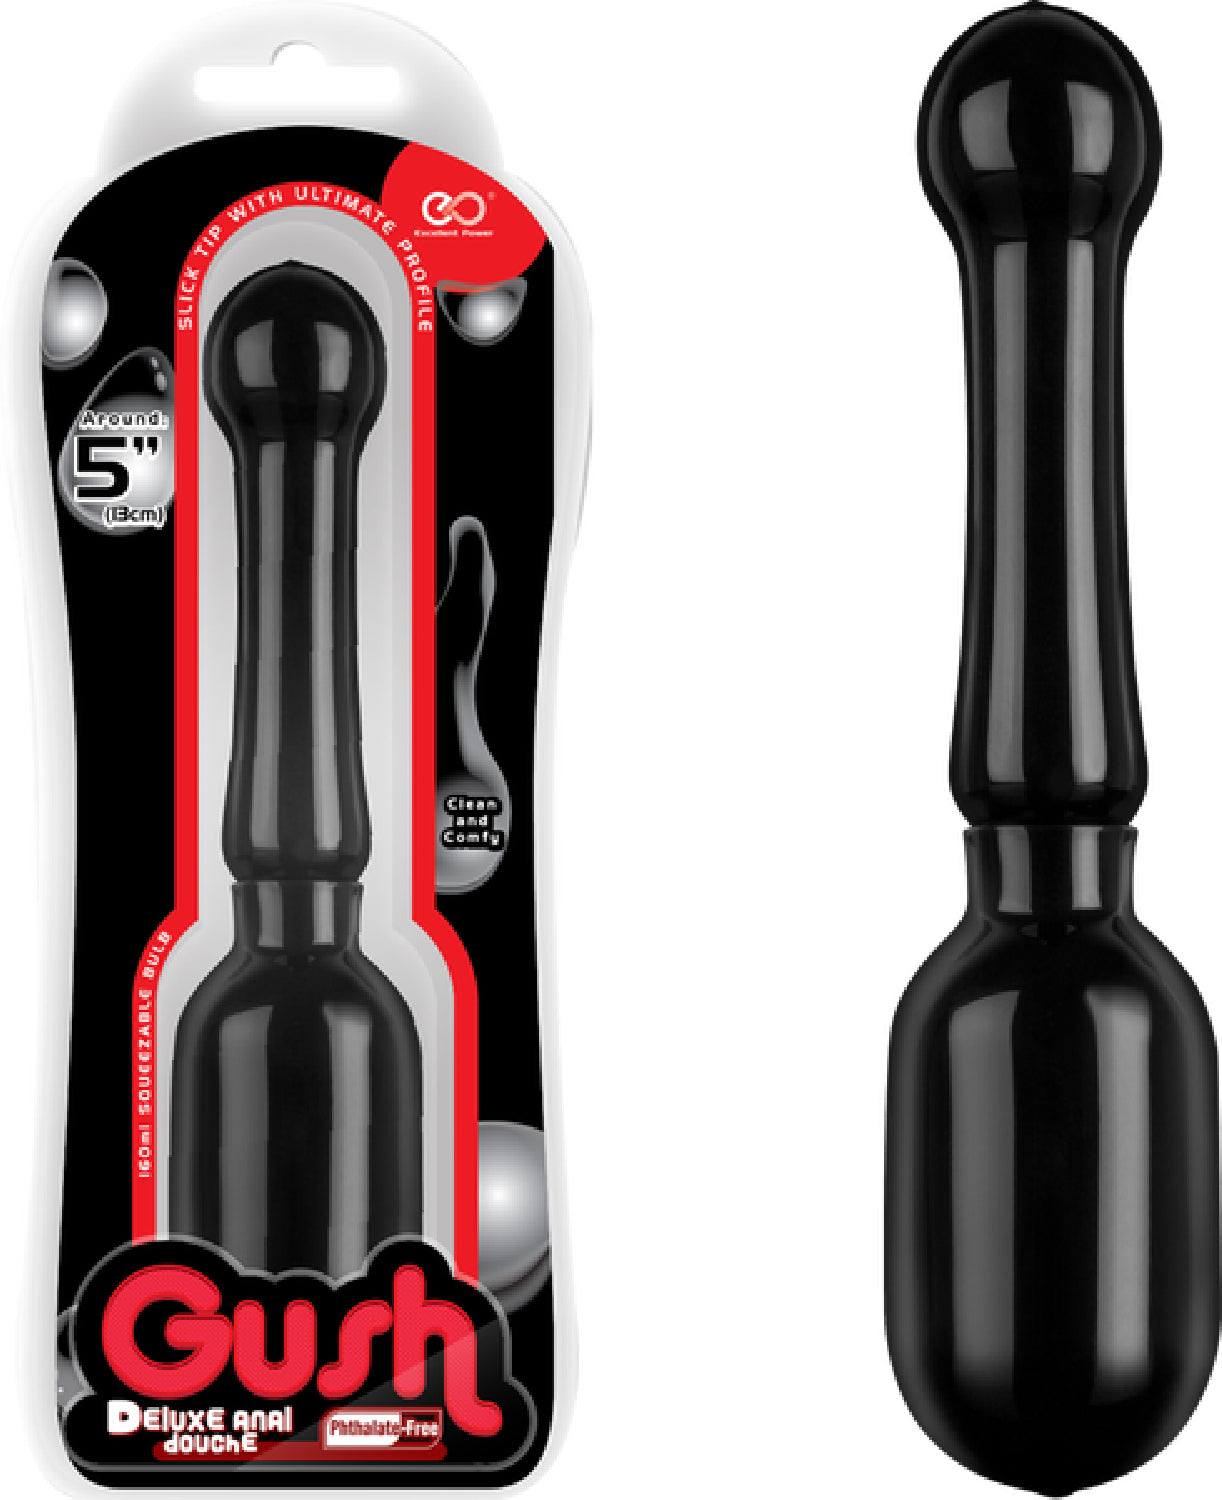 Gush! Deluxe Anal Douche (Black)  - Club X